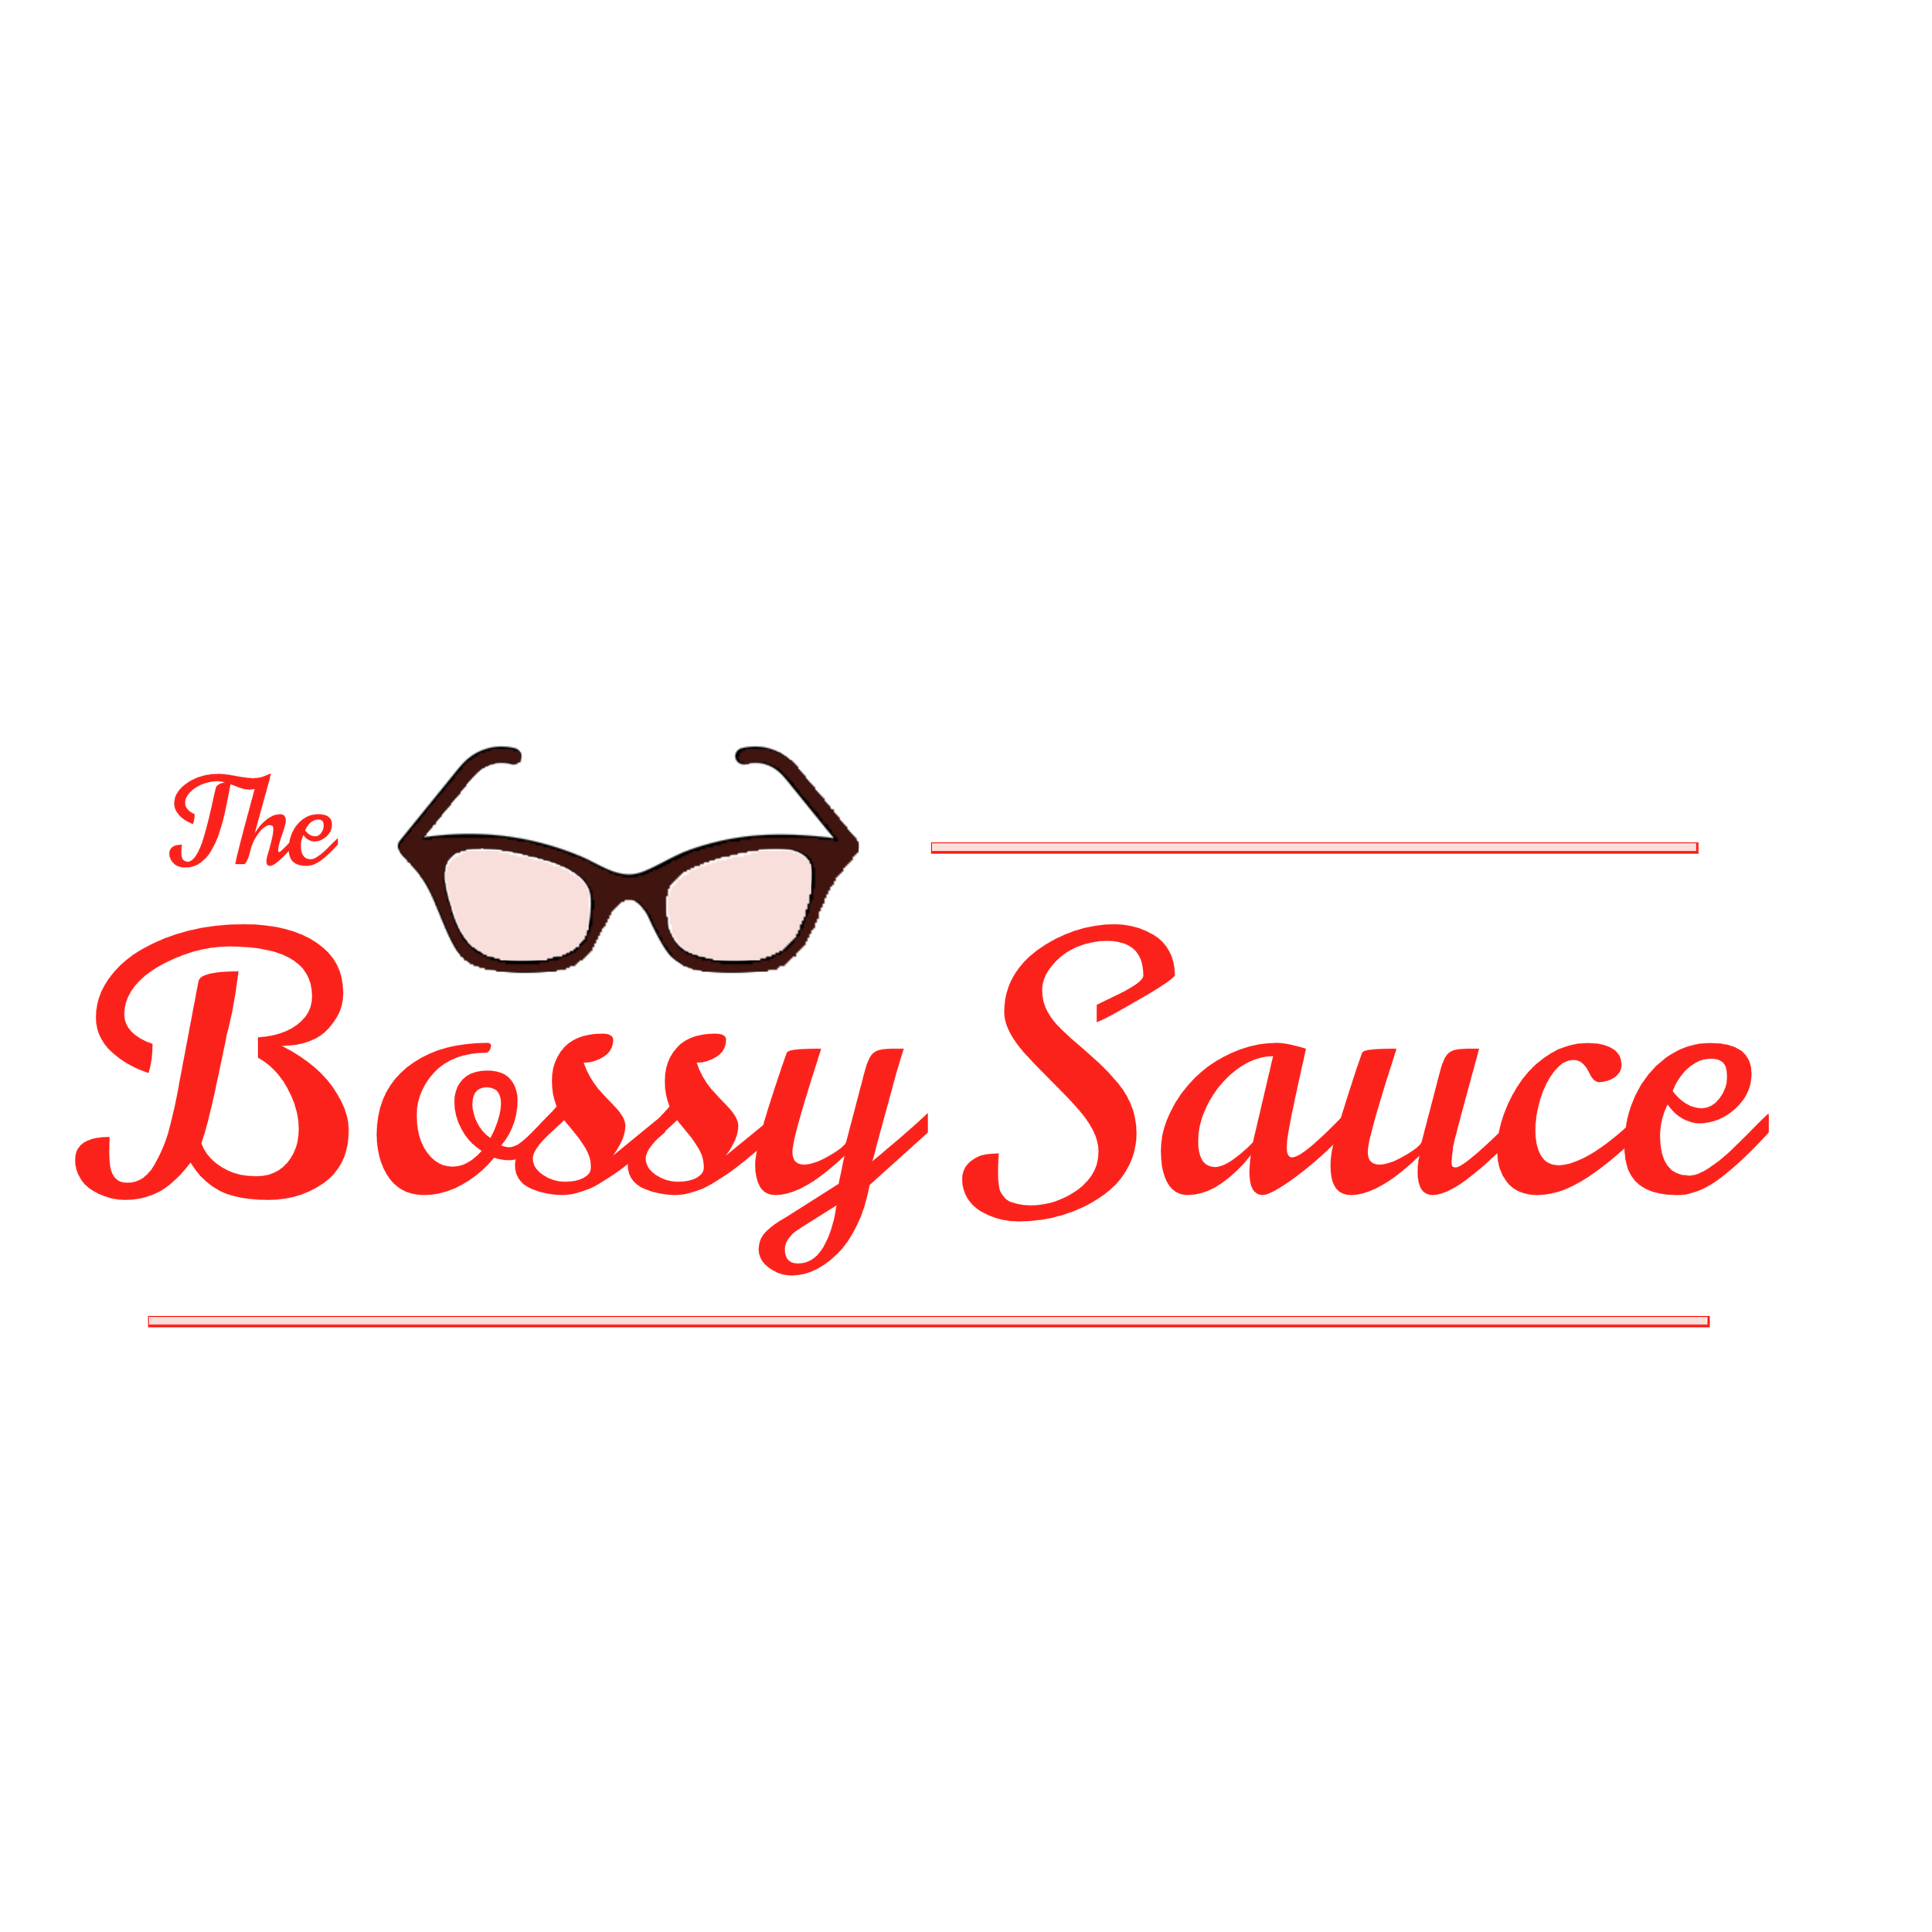 2022's Best 22 Tech & Wellness Buys With FSA / HSA Funds; From a San  Francisco HR Director — The Bossy Sauce - Career Podcast & Blog